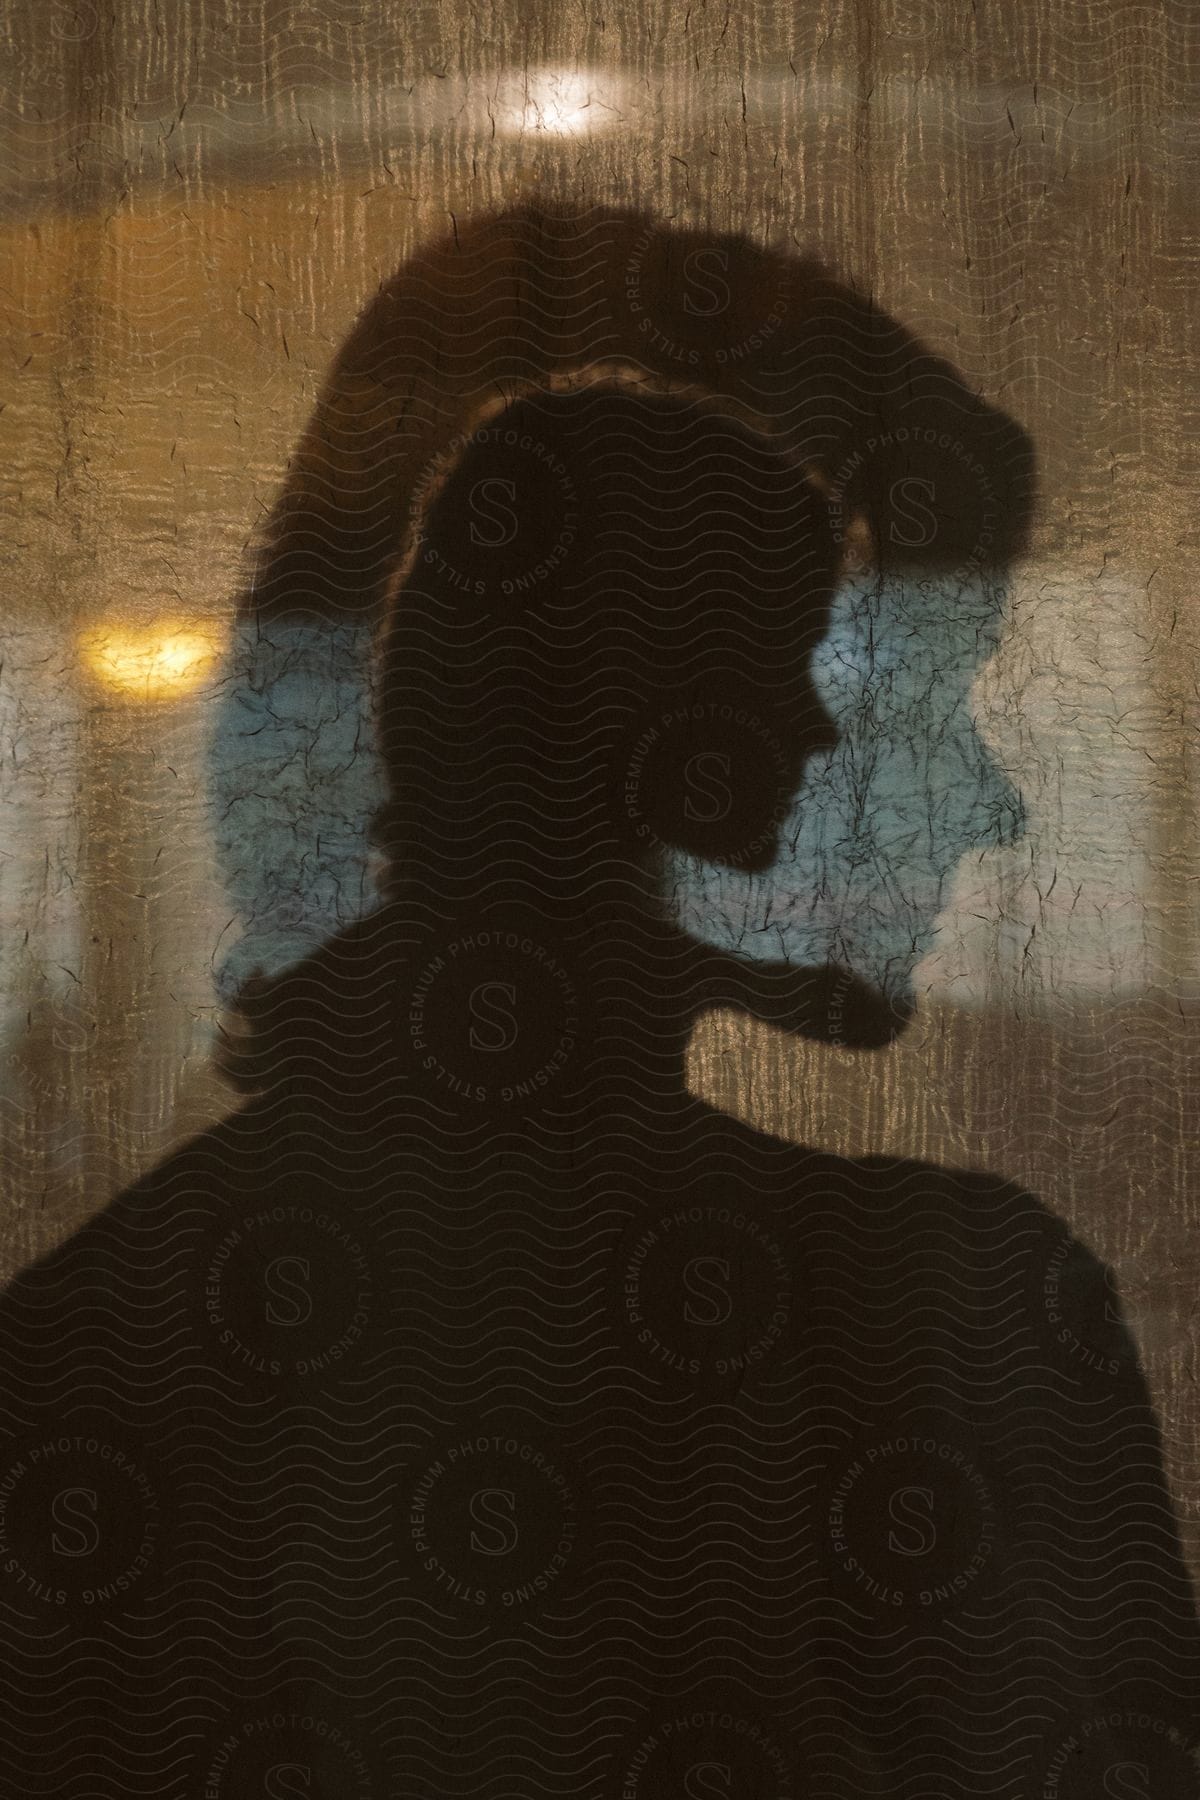 Silhouette of a young woman casting a shadow on a translucent cloth